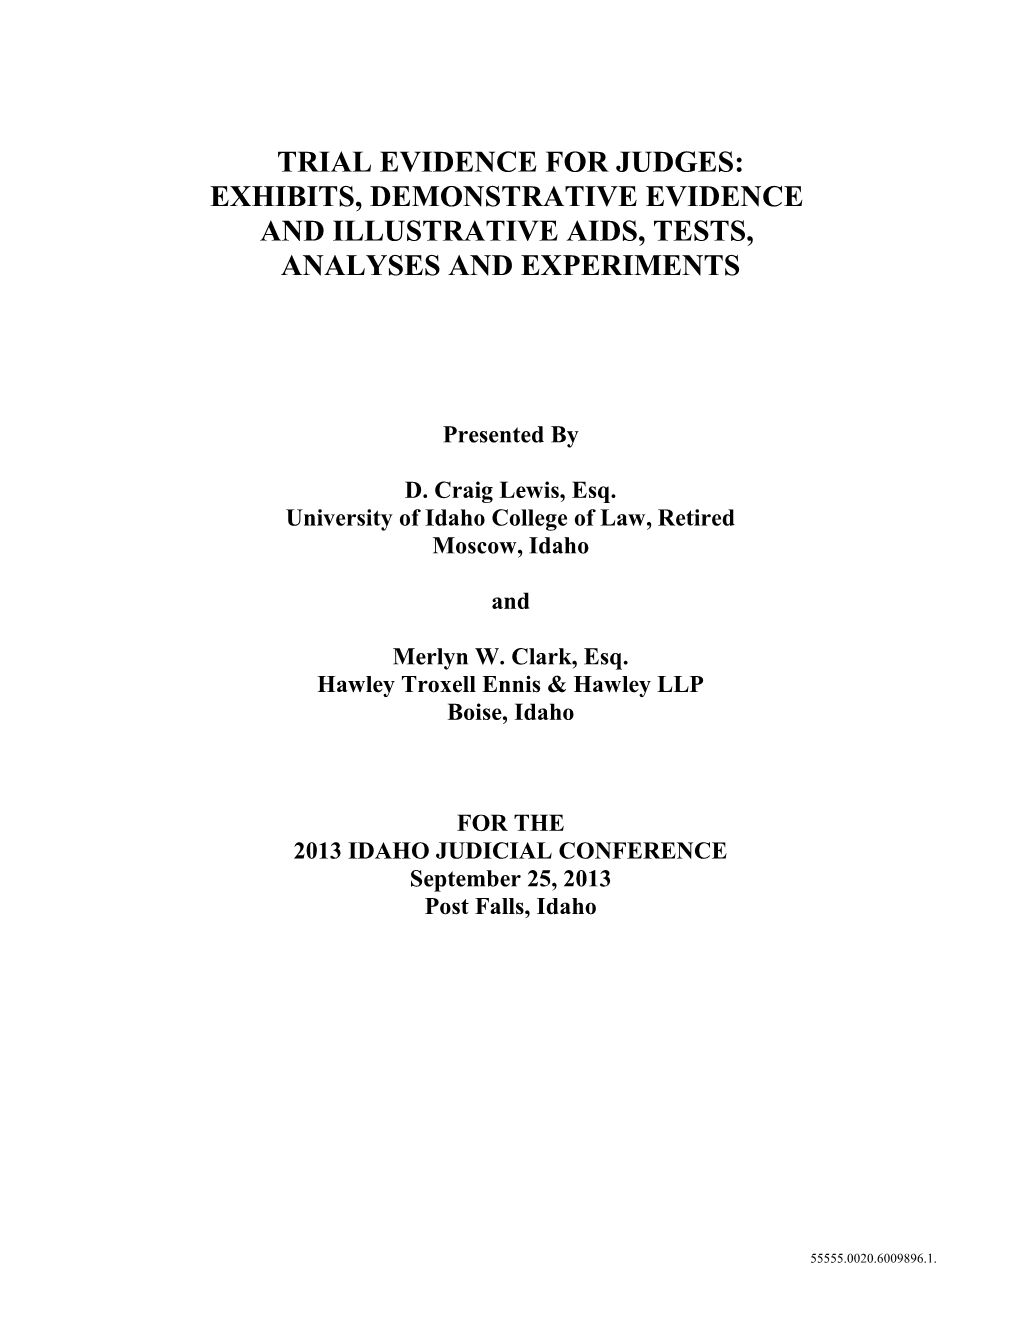 Foundations For Exhibits, Demonstrative Evidence And